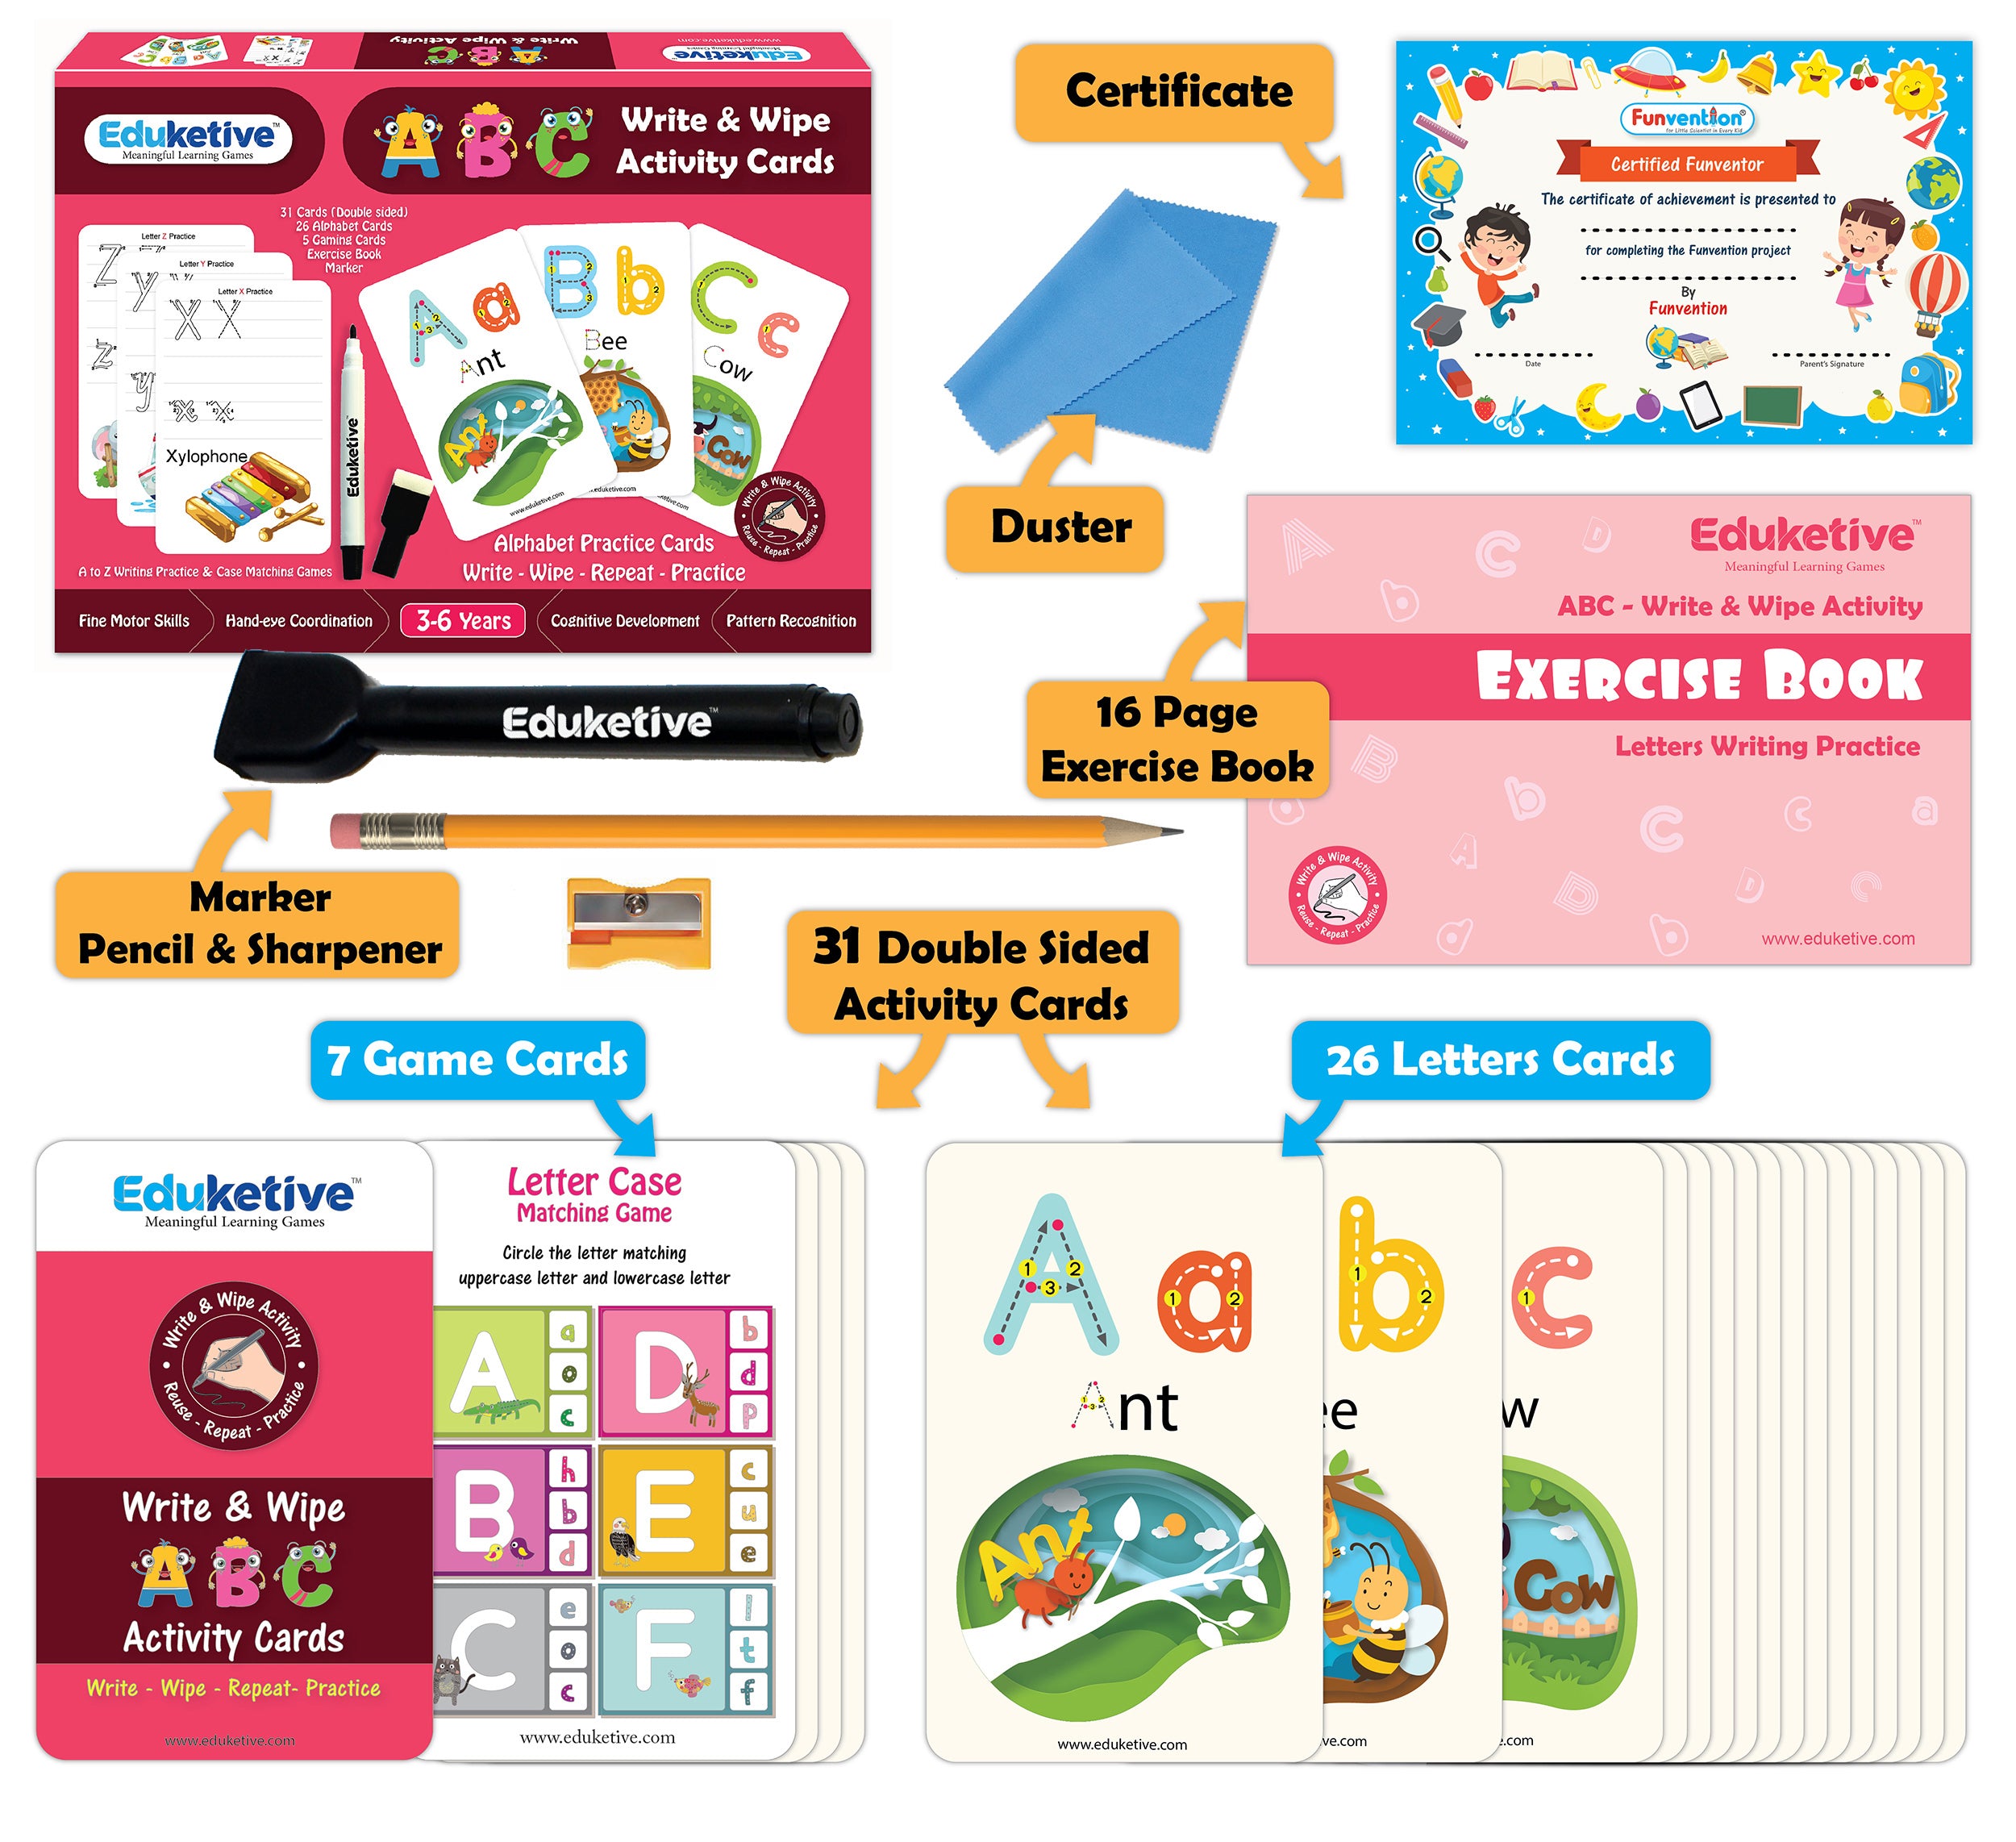 ABC Letters - Write & Wipe Activity | Book Bargain Buy